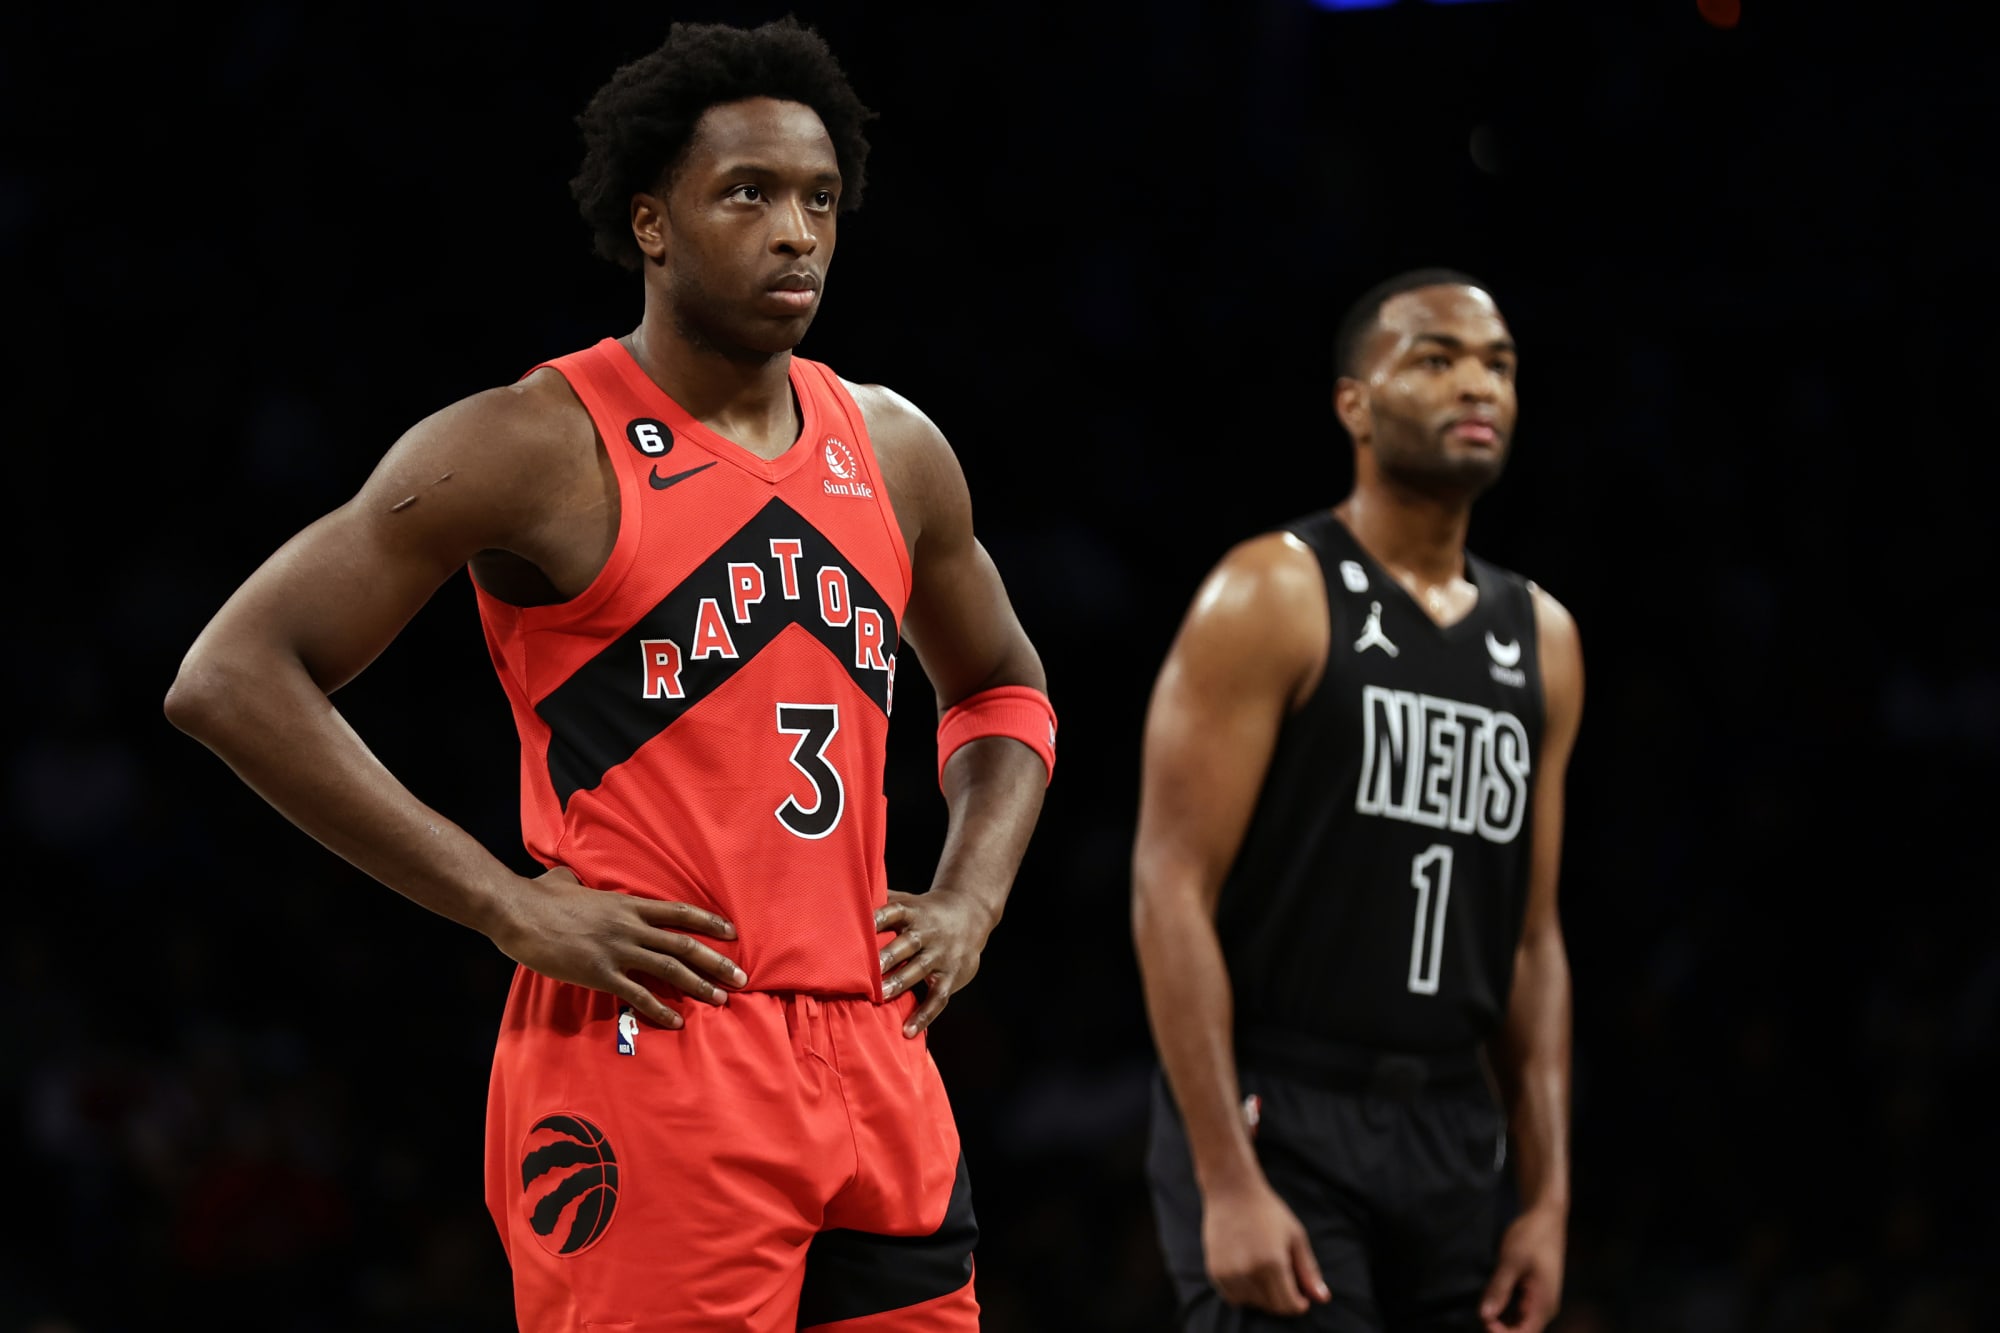 Raptors trade rumors: Is OG Anunoby unhappy with Toronto?